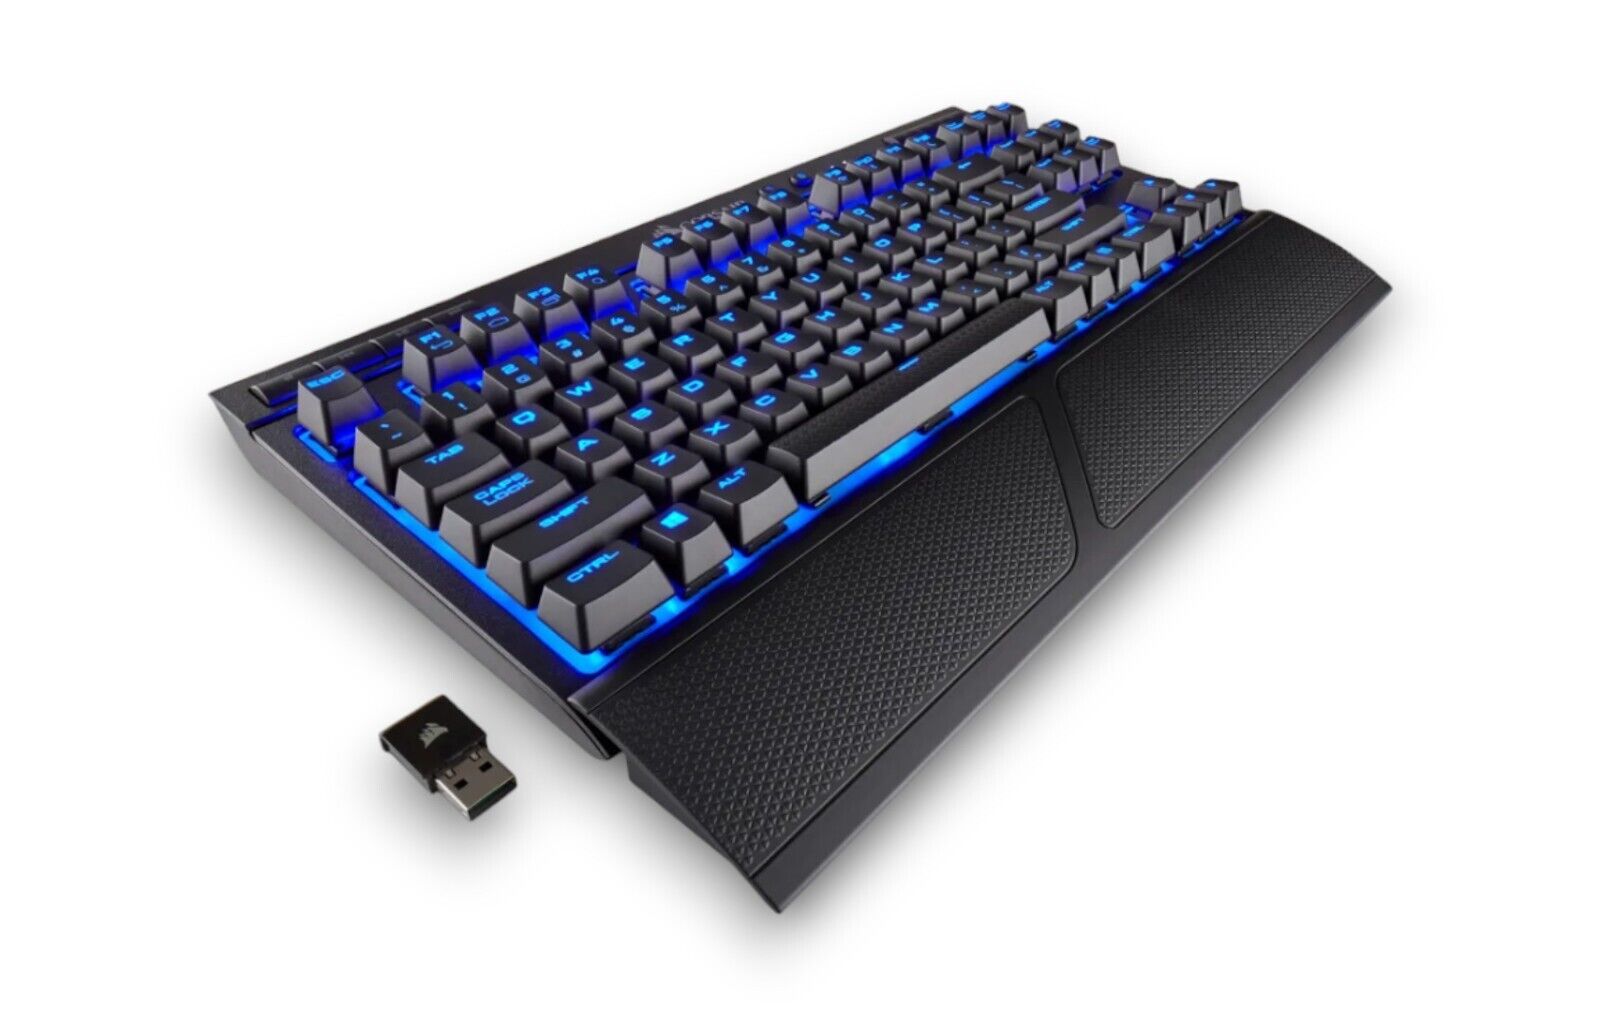 K63 Wireless Special Edition Mechanical Gaming Keyboard — Ice Blue LED — CHERRY MX Red - Ricky's Garage